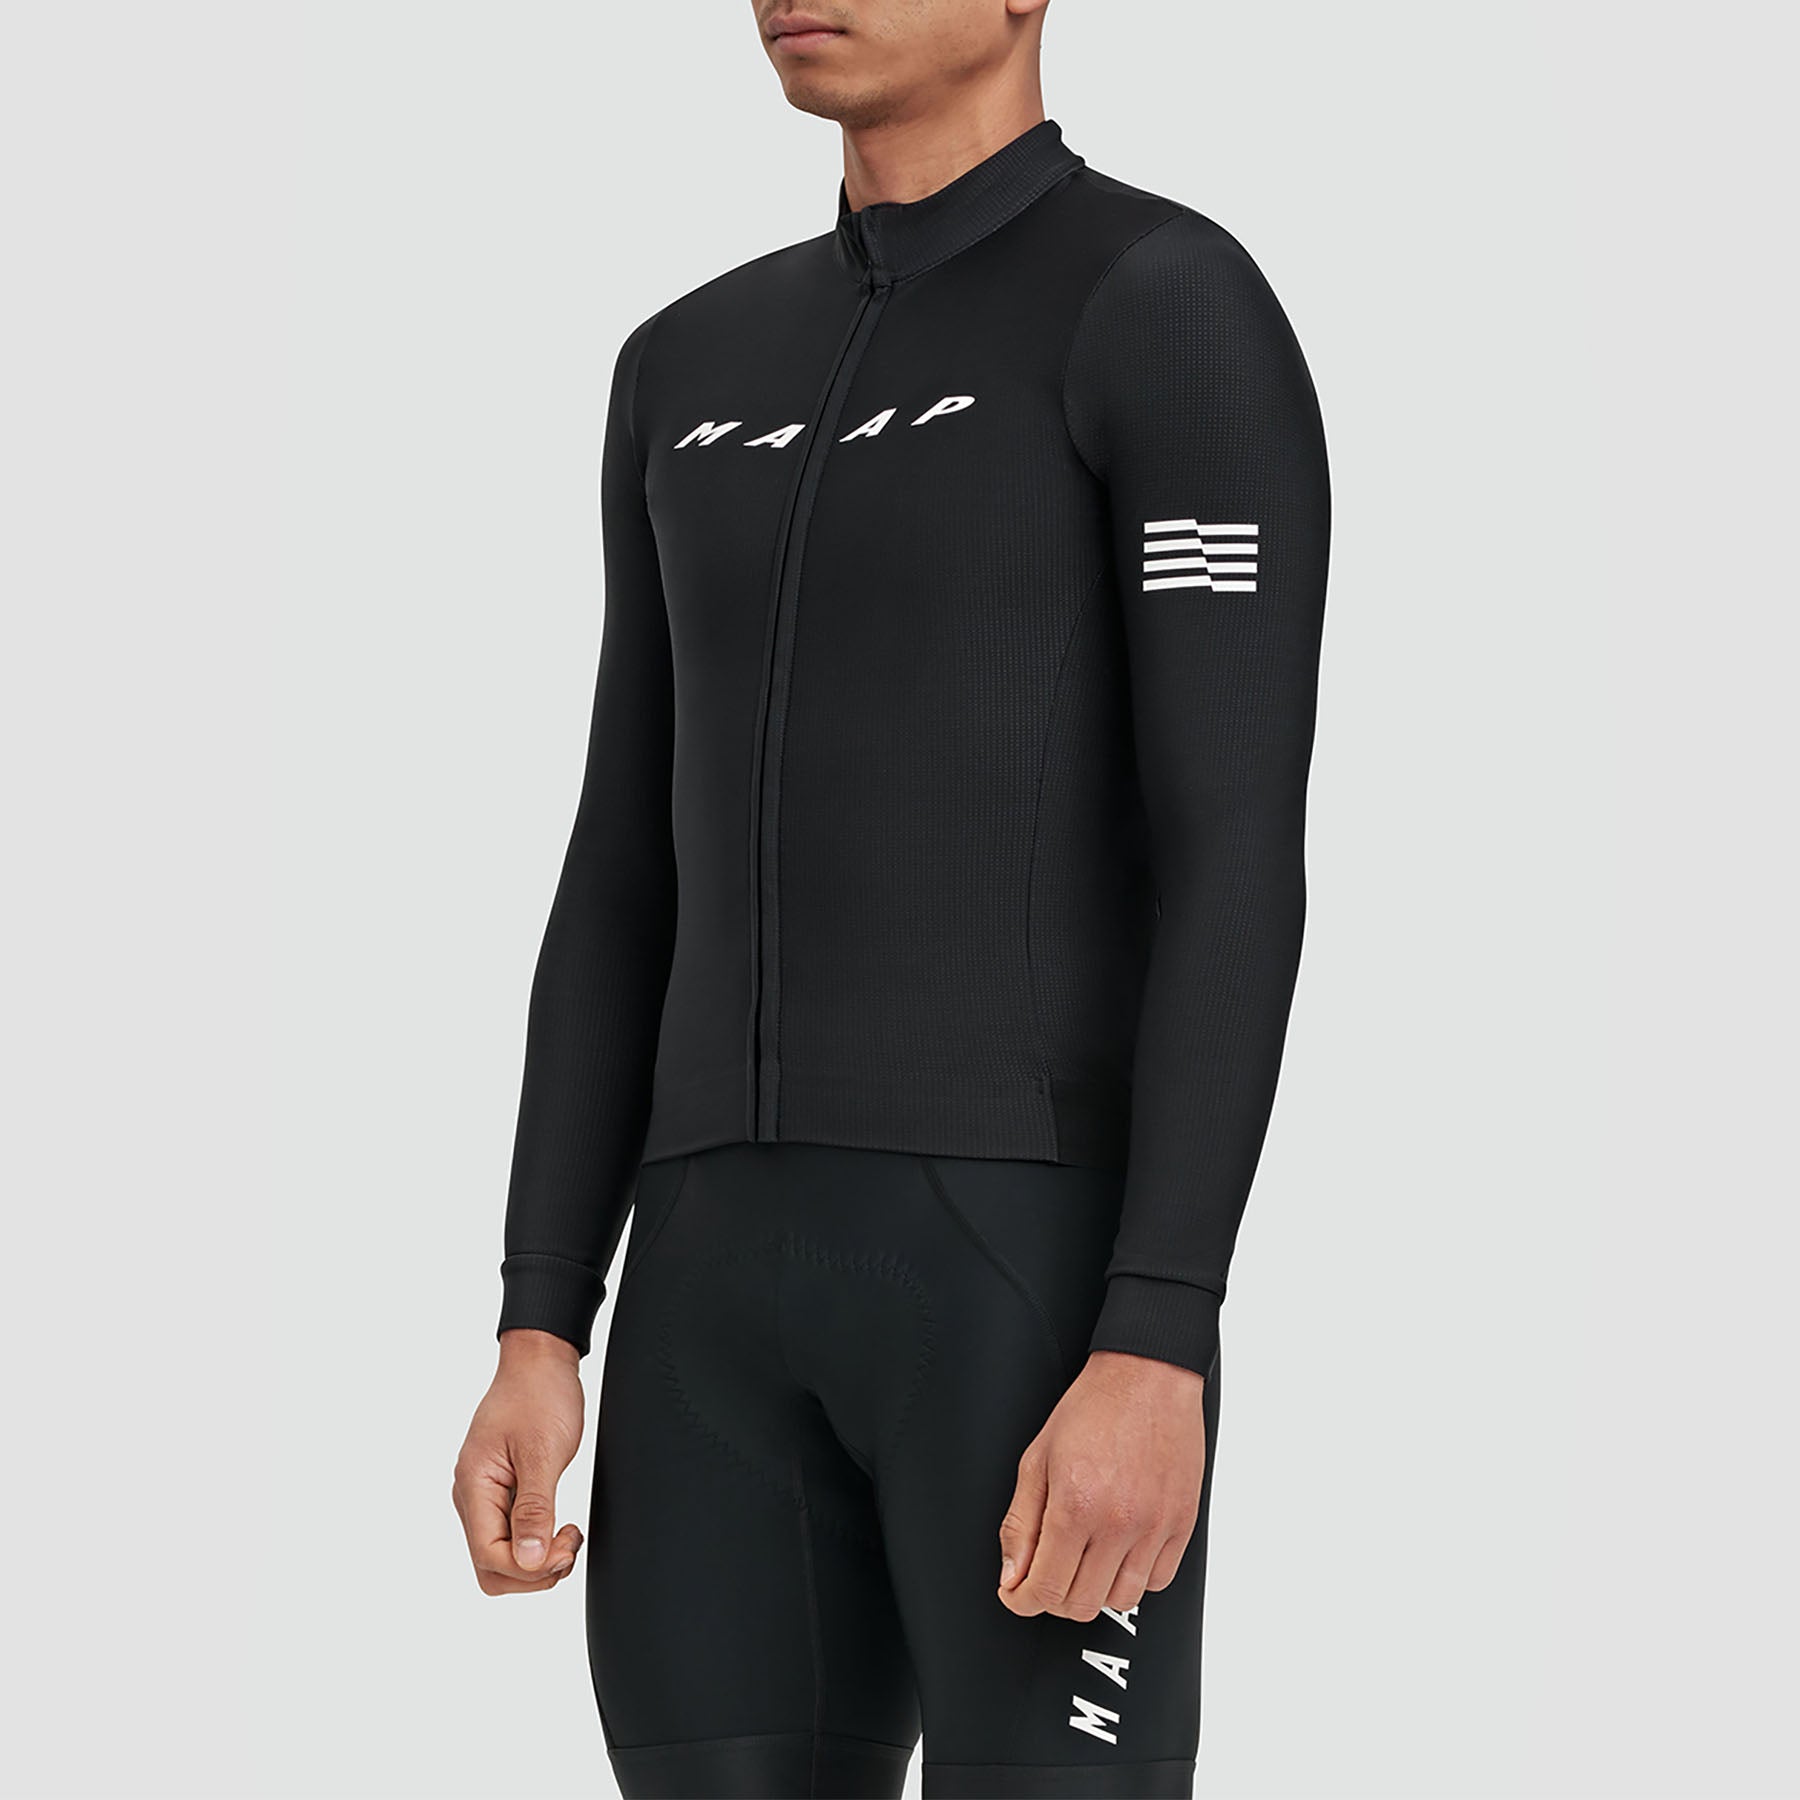 Maillot à manches longues Evade Thermal 2.0 - Noir